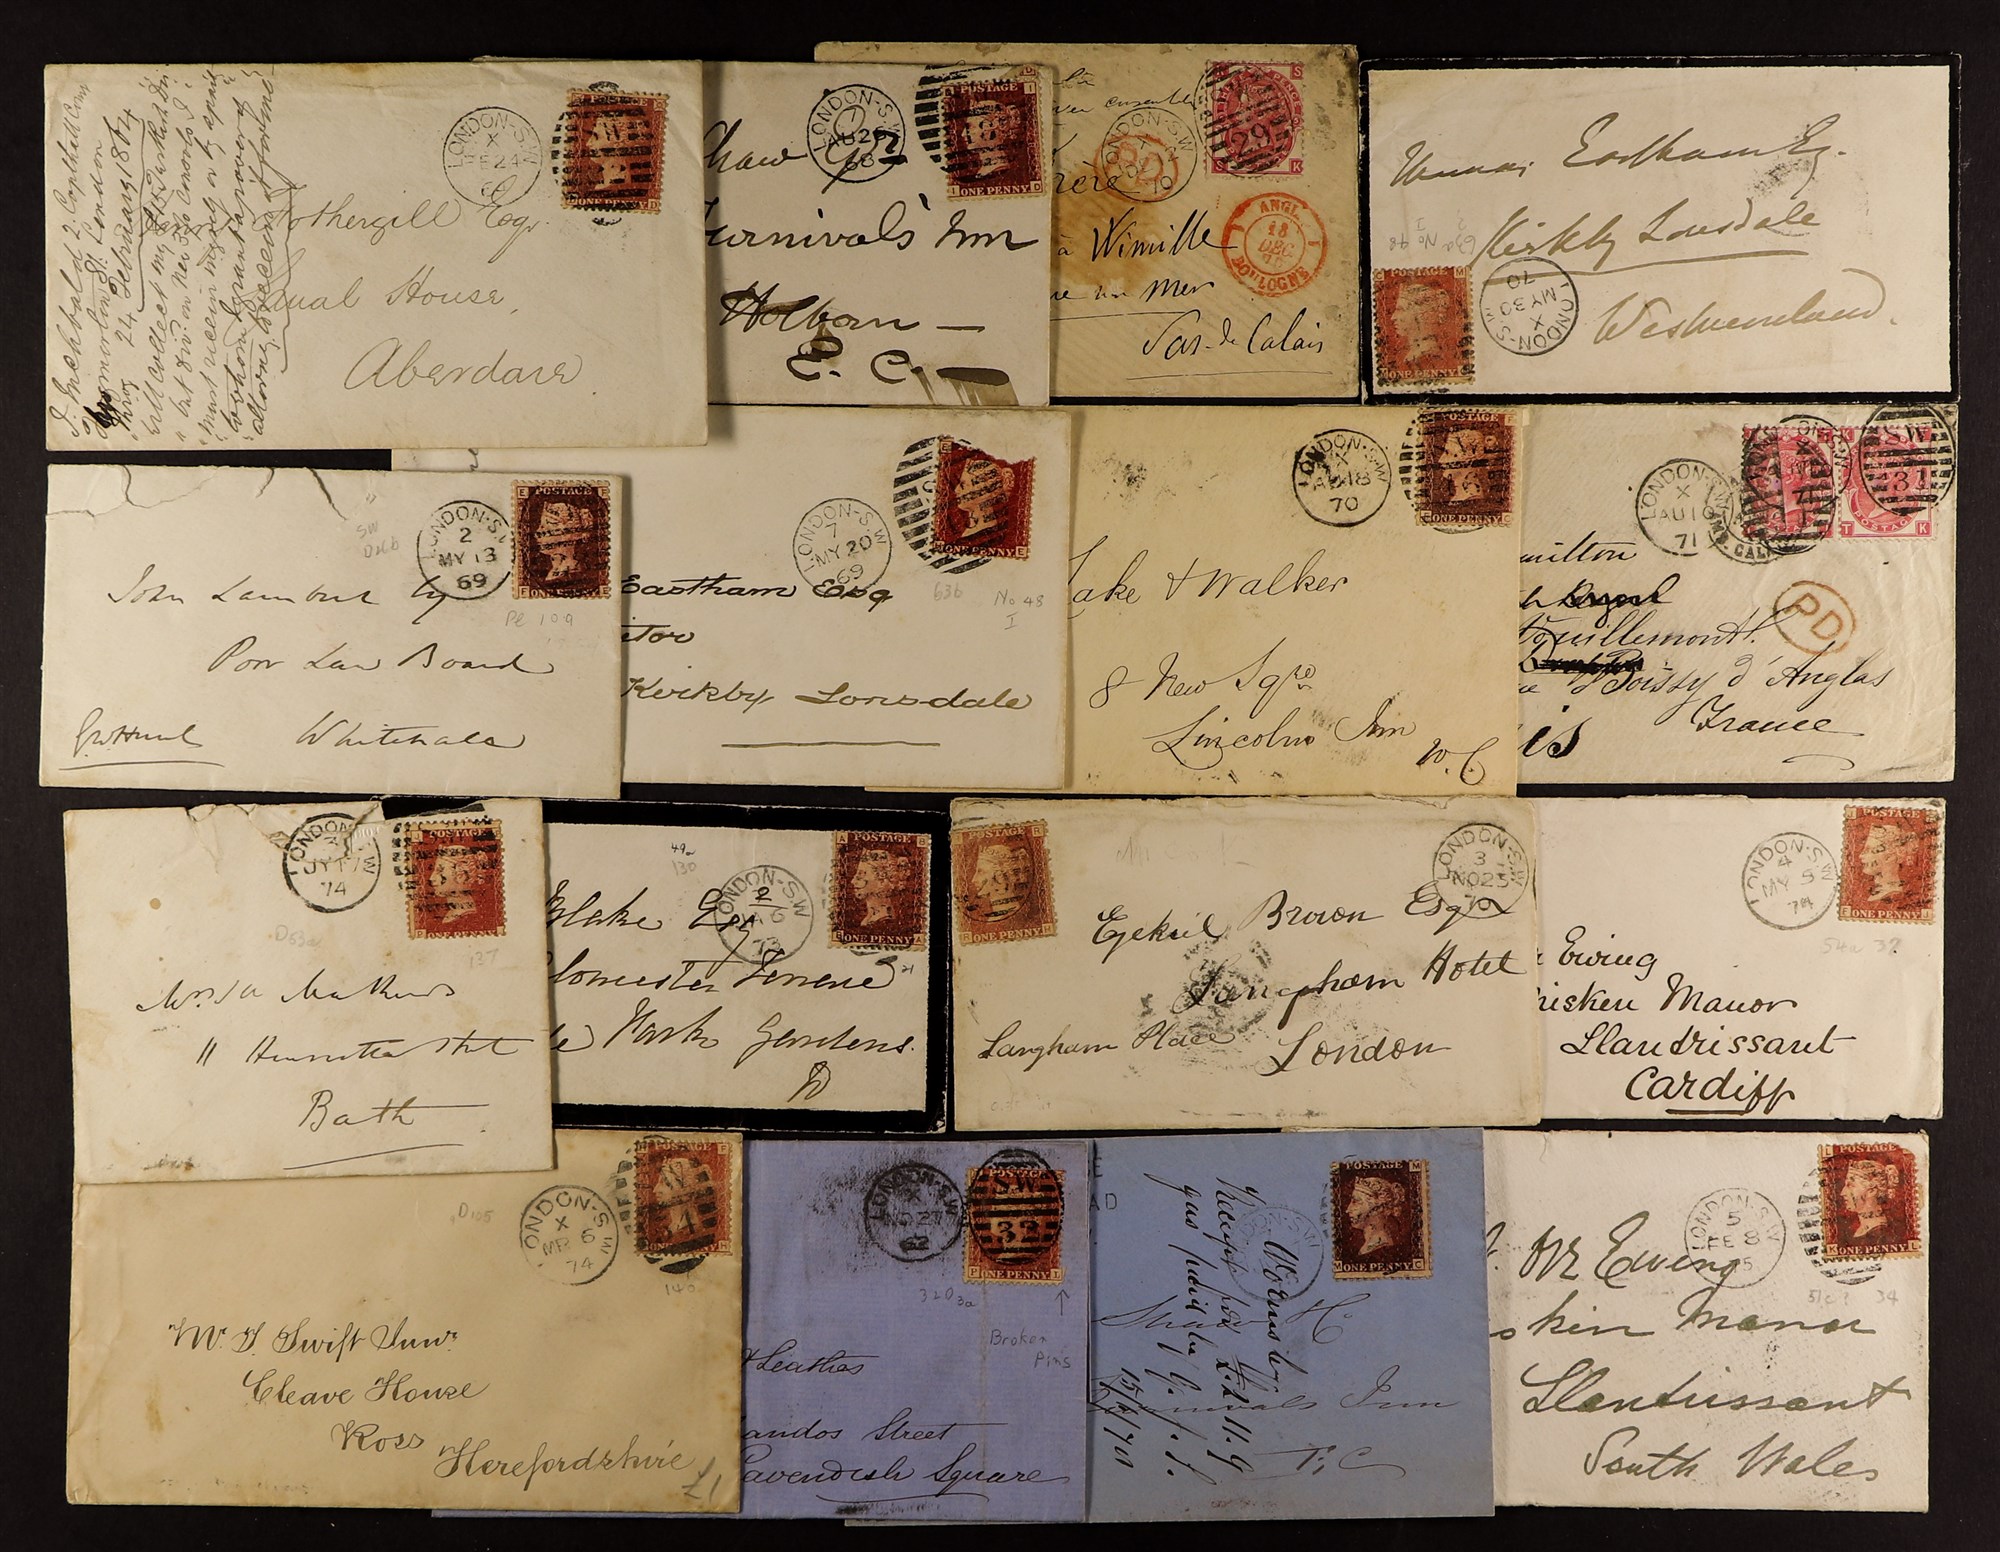 GB.QUEEN VICTORIA 1858 - 1879 COVERS - LONDON SOUTH WESTERN DISTRICT OFFICE. 65 covers with stamps